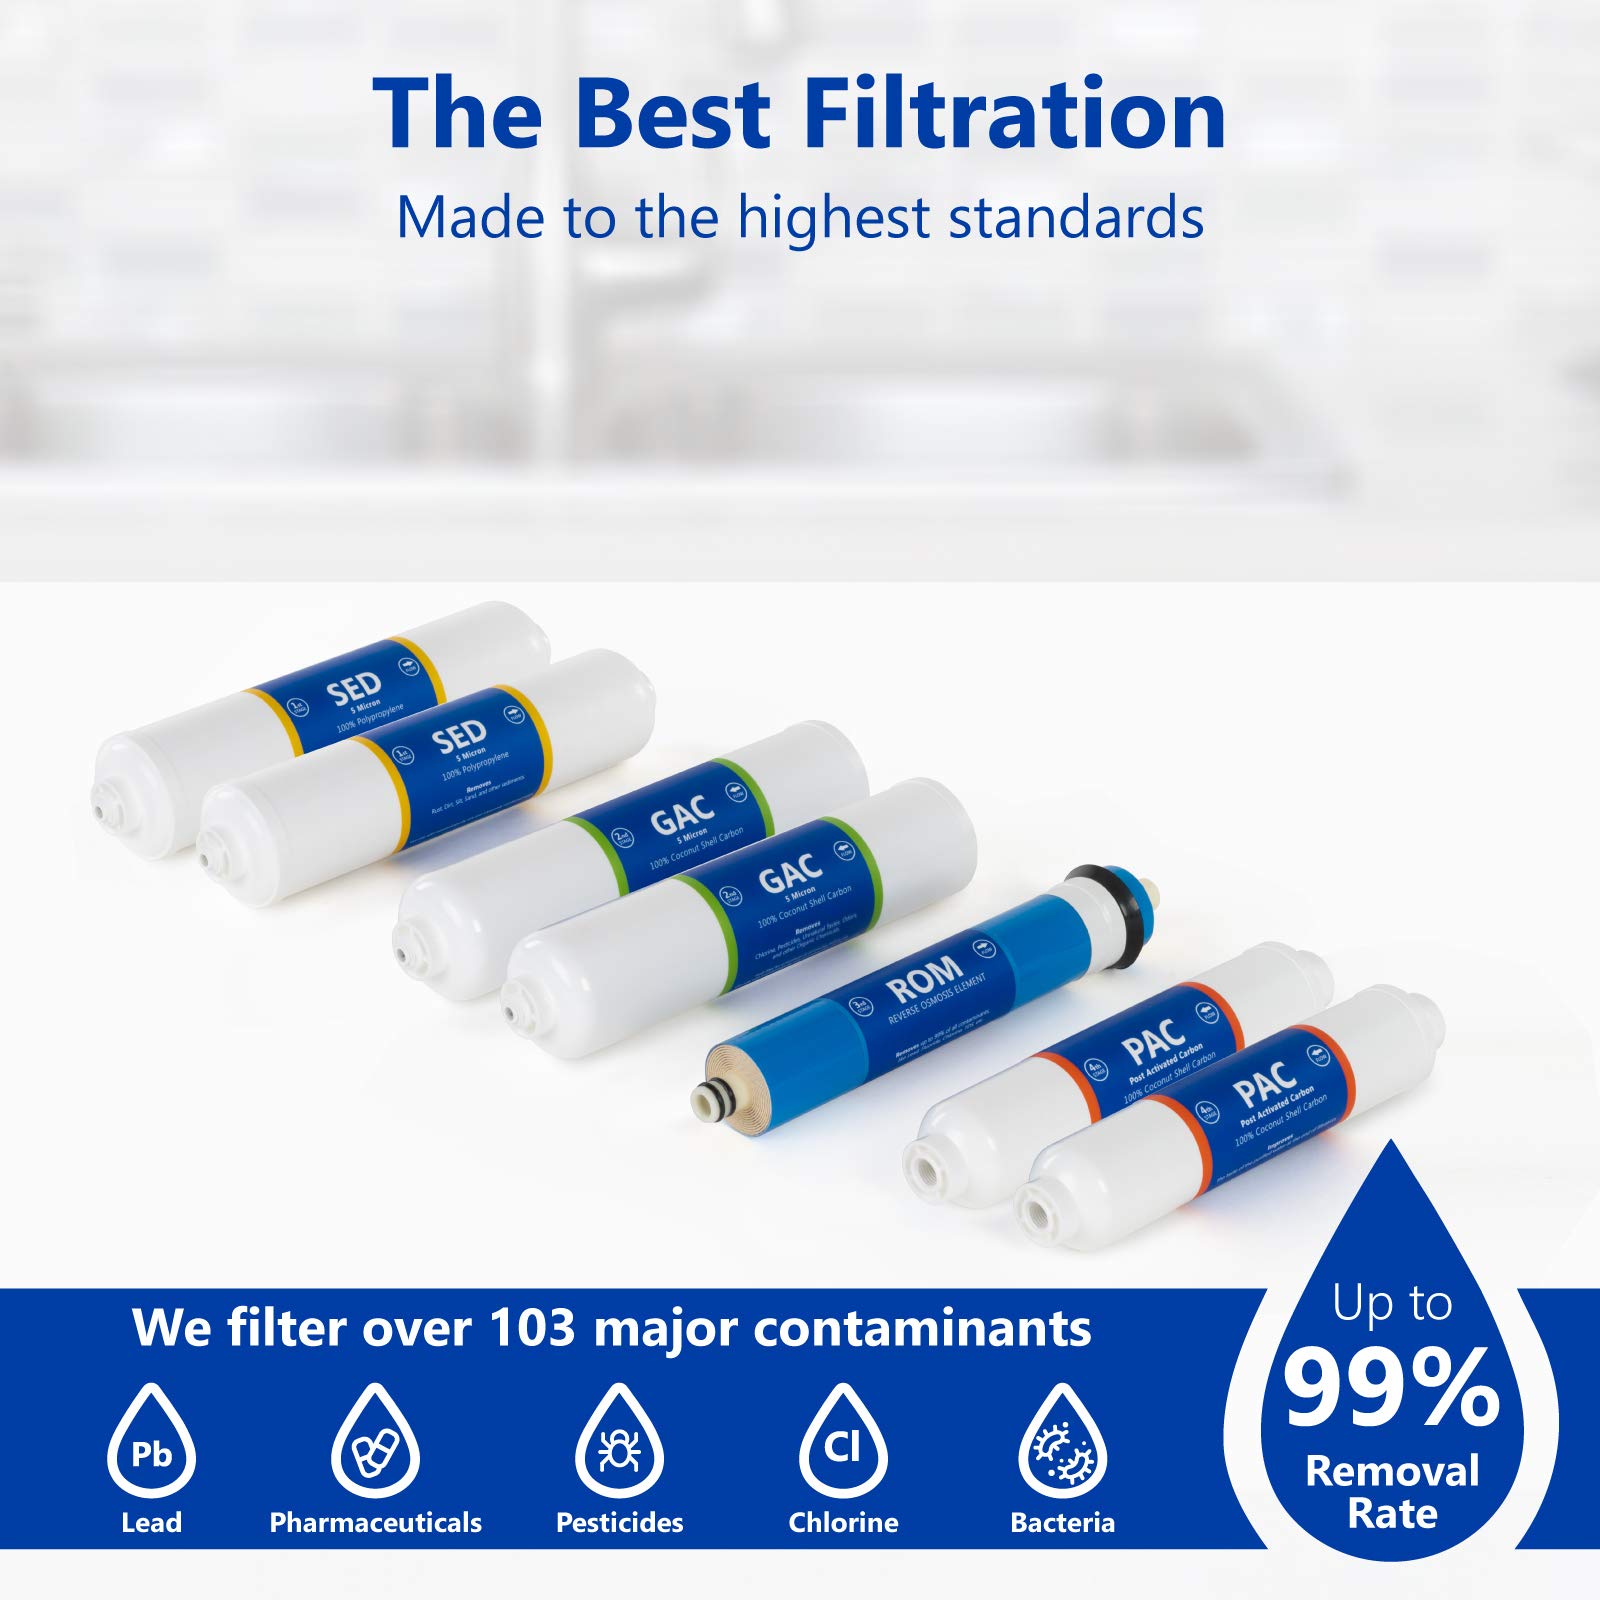 Express Water – Countertop Reverse Osmosis System Filter Set – 7 Replacement Filters – 1?4” Quick Connect Filter Cartridges – Sediment and Carbon Filters – 100 GDP RO Membrane – 1 Year Filter Set